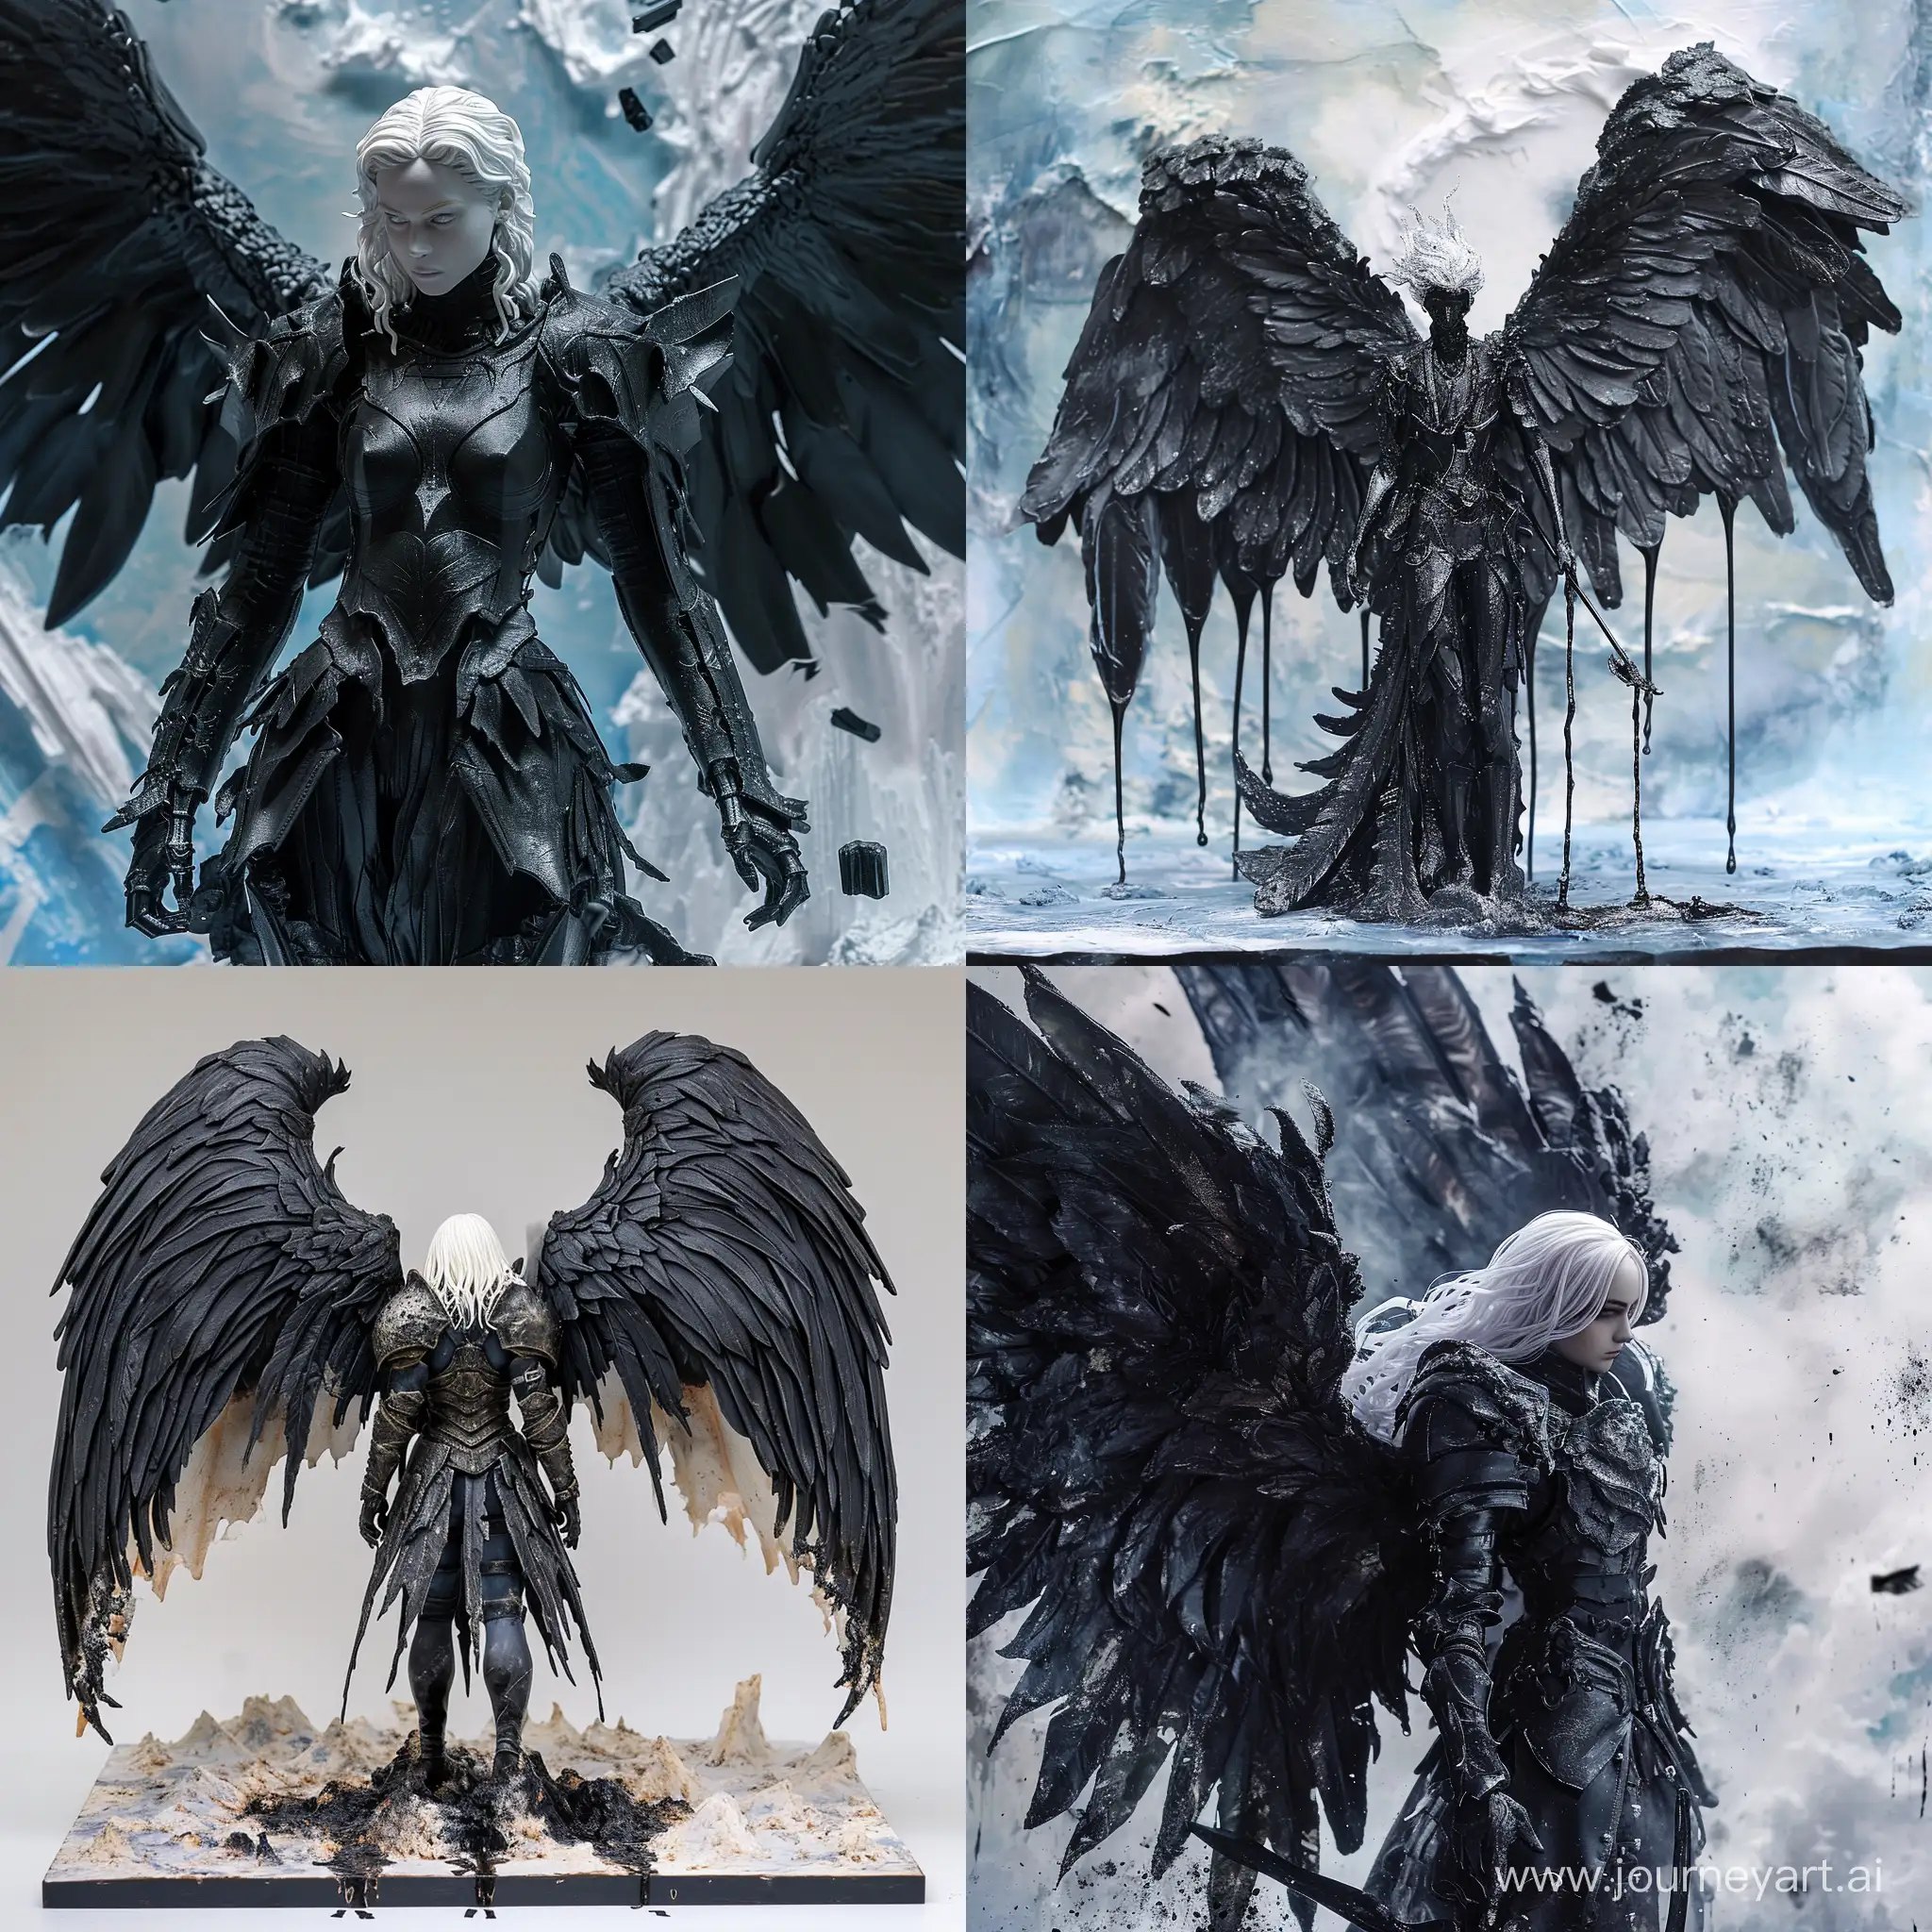 Diorama::1.5, dark angel with large black wings, standing in front of a sky background with white and blue hues, the angel has white hair and is wearing a armor-like outfit, the wings are spread out and there are black paint drips trailing from them, --quality 2